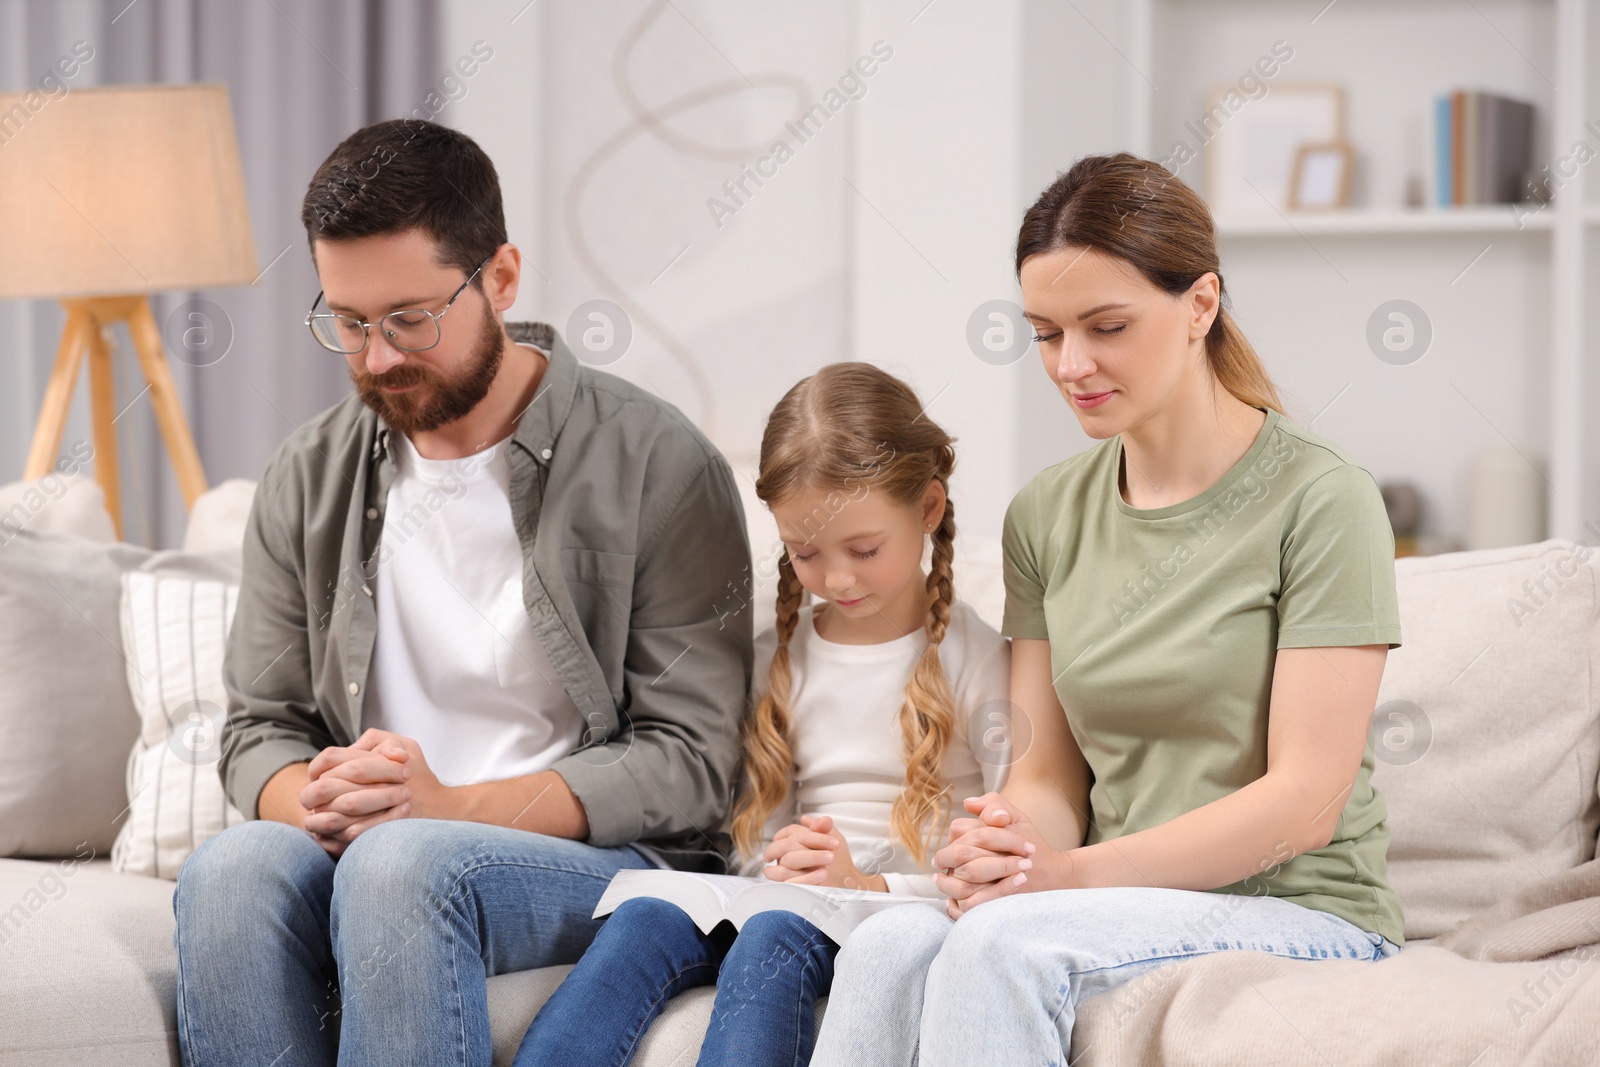 Photo of Girl and her godparents praying together on sofa at home